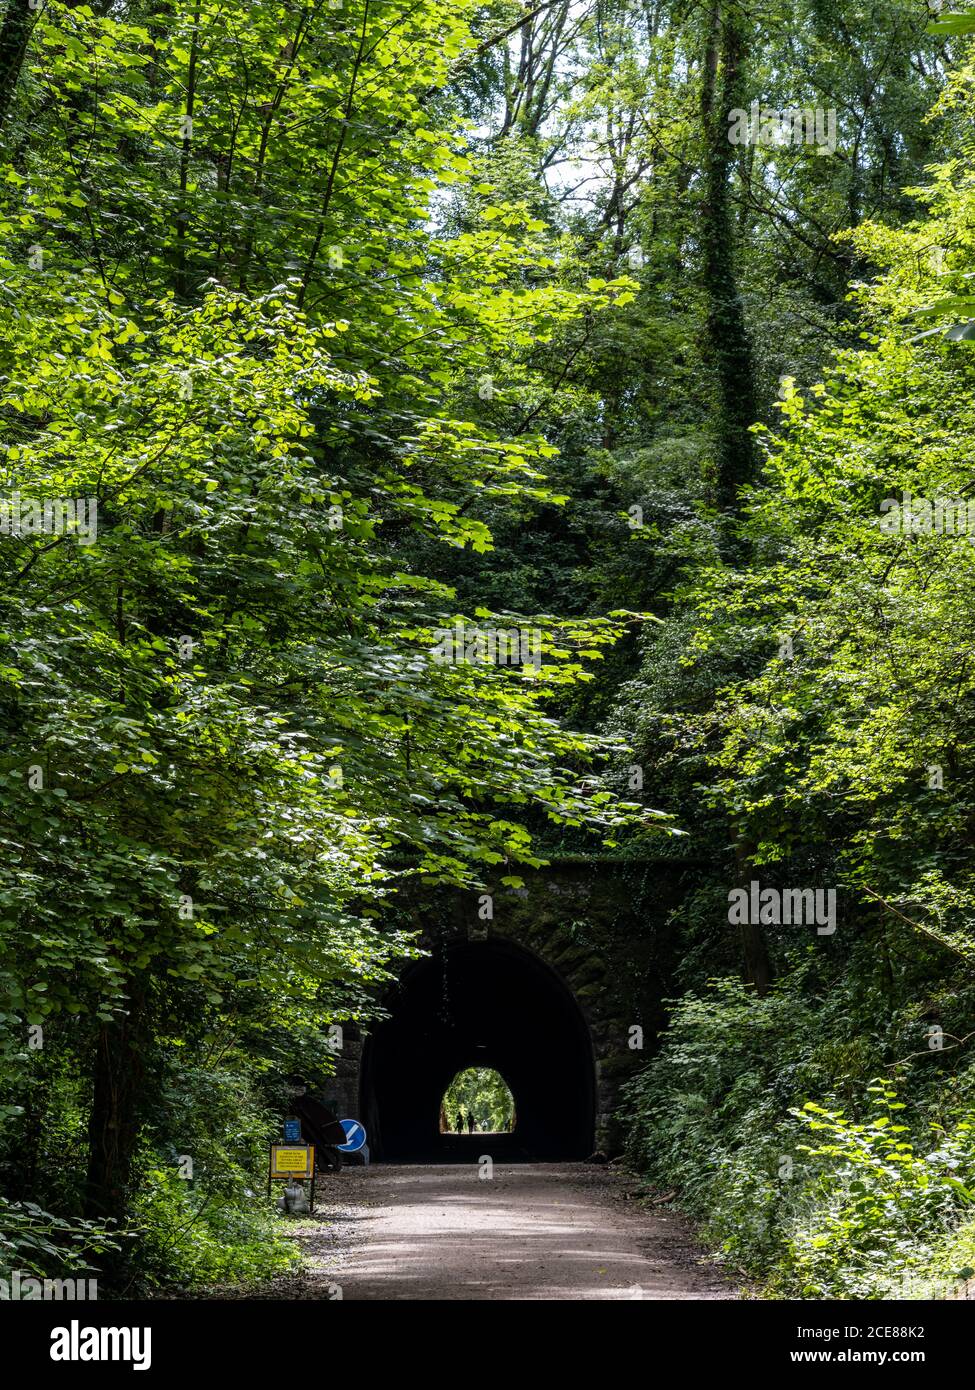 The Strawberry Line cycleway, part of National Cycle Network route 26, runs through Shute Shelve Tunnel under the Mendip Hills of Somerset. Stock Photo